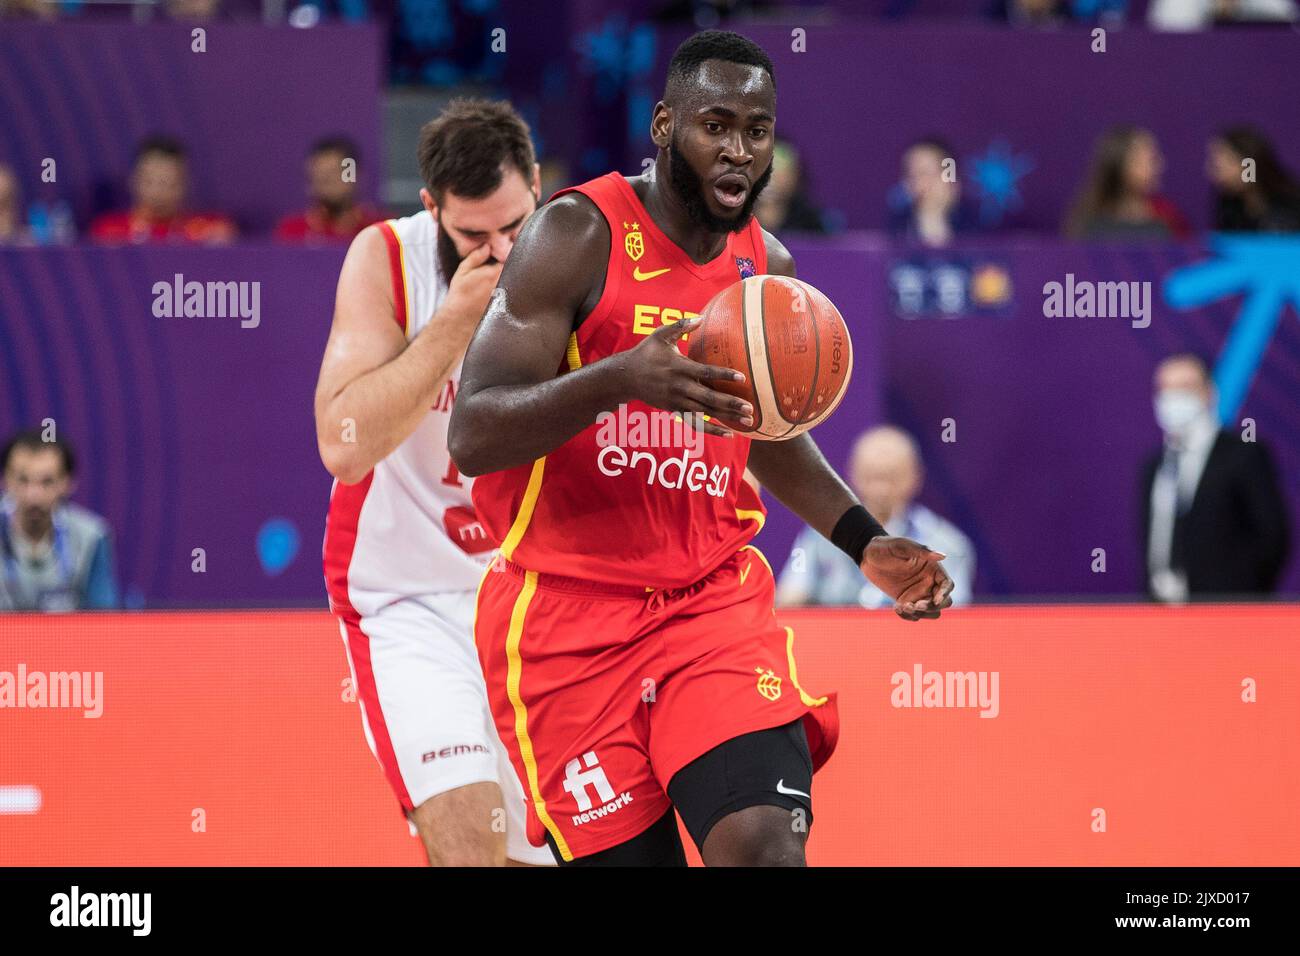 Tbilisi, Georgia, 6th September 2022. Usman Garuba of Spain in action during the FIBA EuroBasket 2022 group A match between Montenegro and Spain at Tbilisi Arena in Tbilisi, Georgia. September 6, 2022. Credit: Nikola Krstic/Alamy Stock Photo